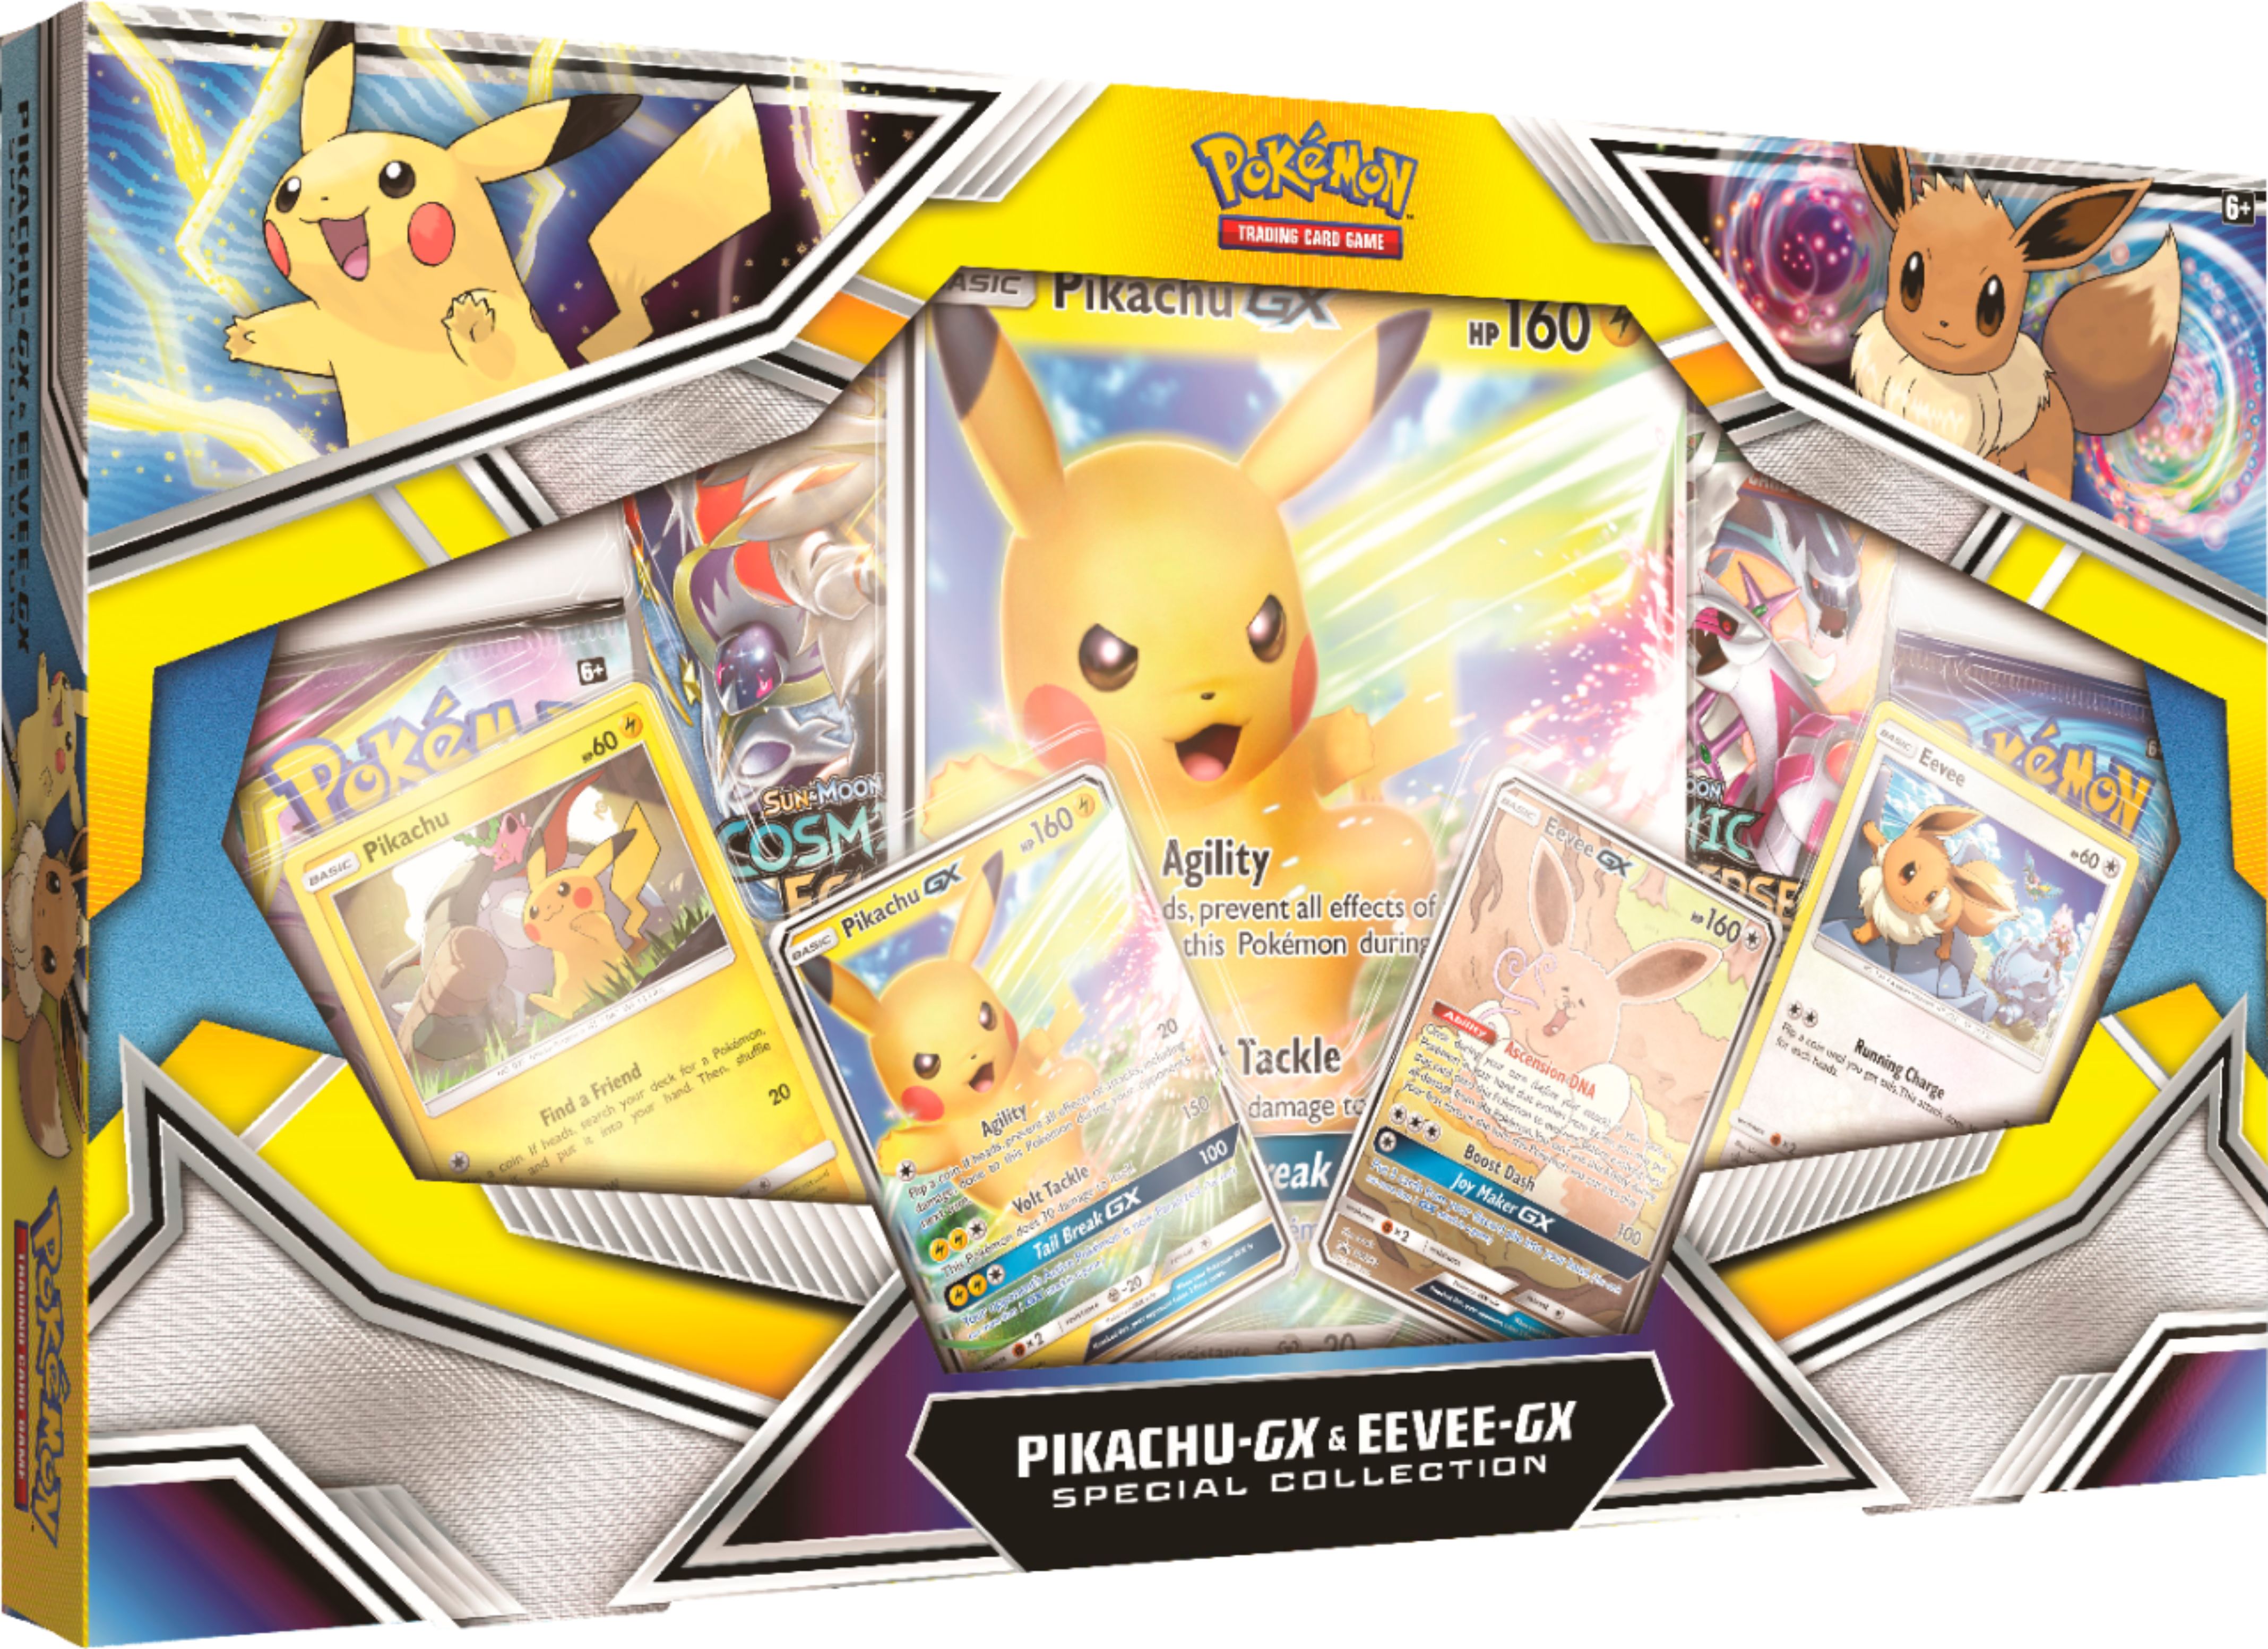 Pokémon Trading Card Game Pikachu Gx Eevee Gx Special Collection